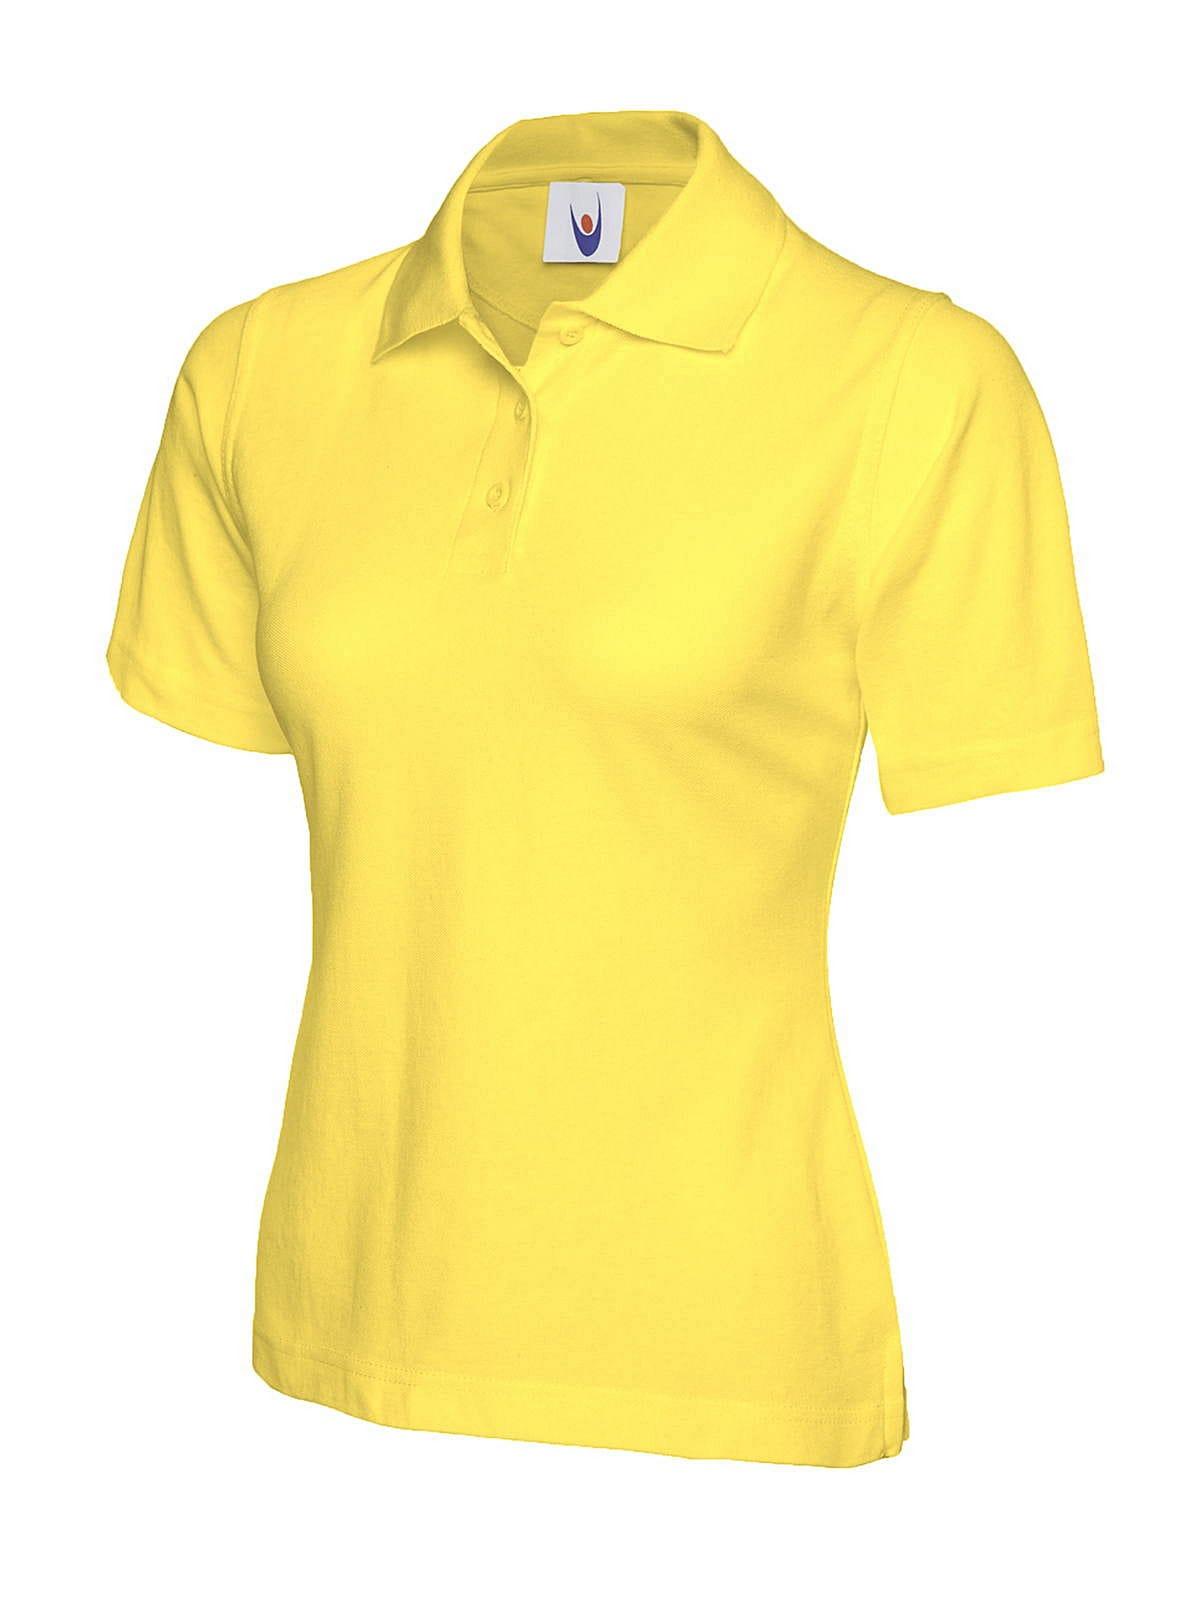 Uneek 220GSM Womens Polo Shirt in Yellow (Product Code: UC106)